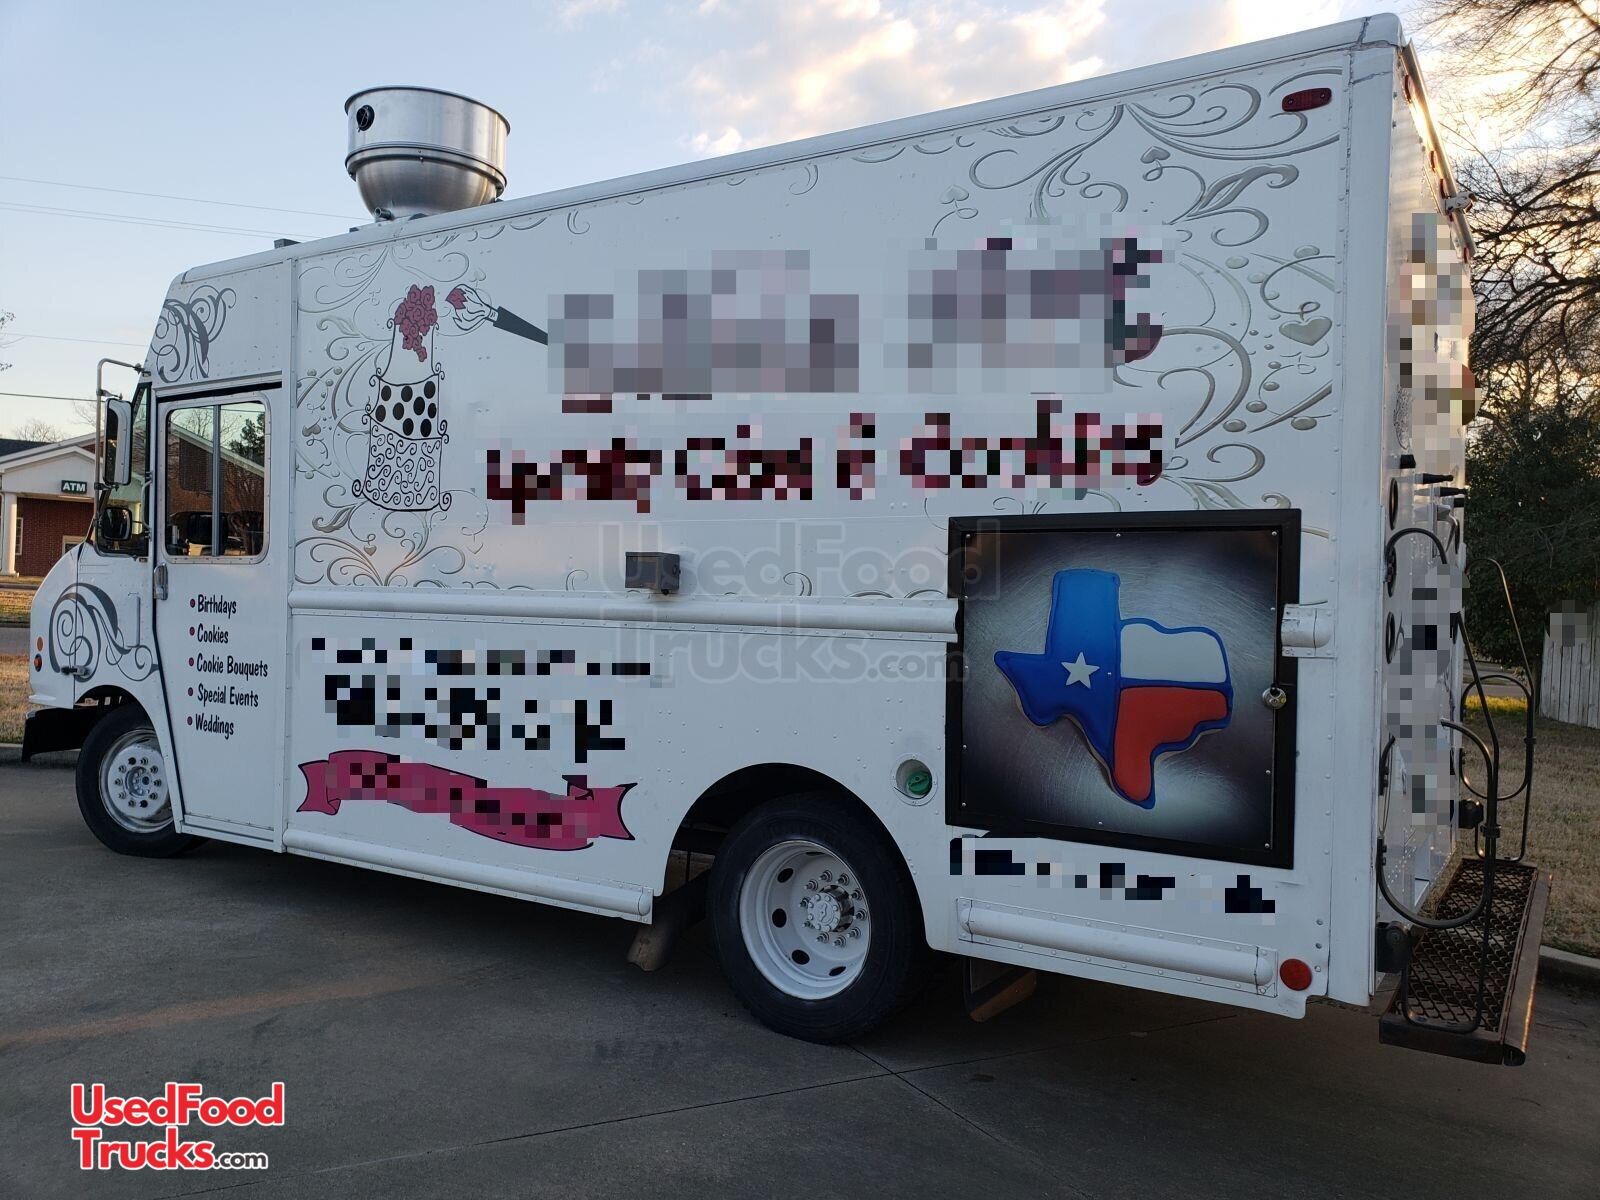 Details about   2011 Workhorse Pizza Truck for Sale in Texas!!! 